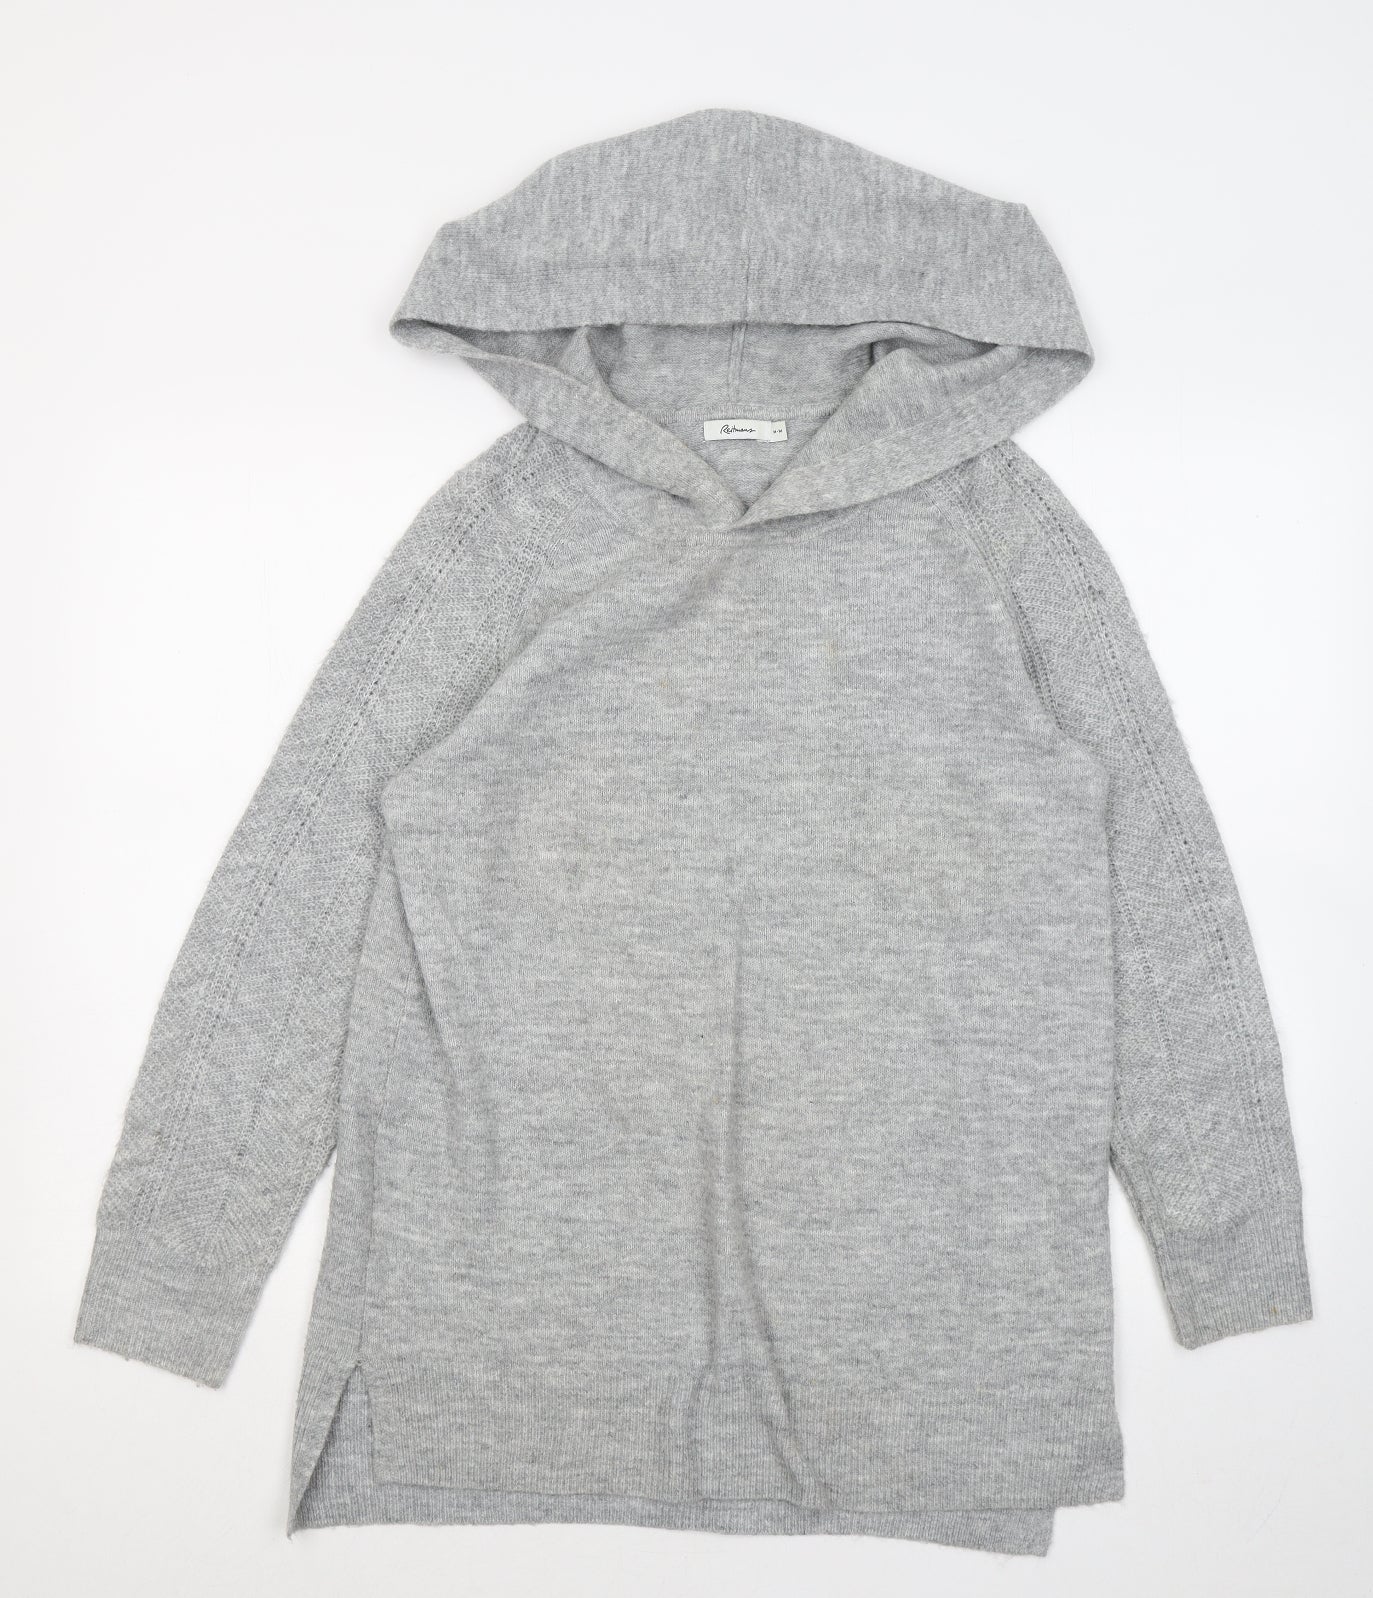 Reitmans Womens Grey Acrylic Pullover Hoodie Size M